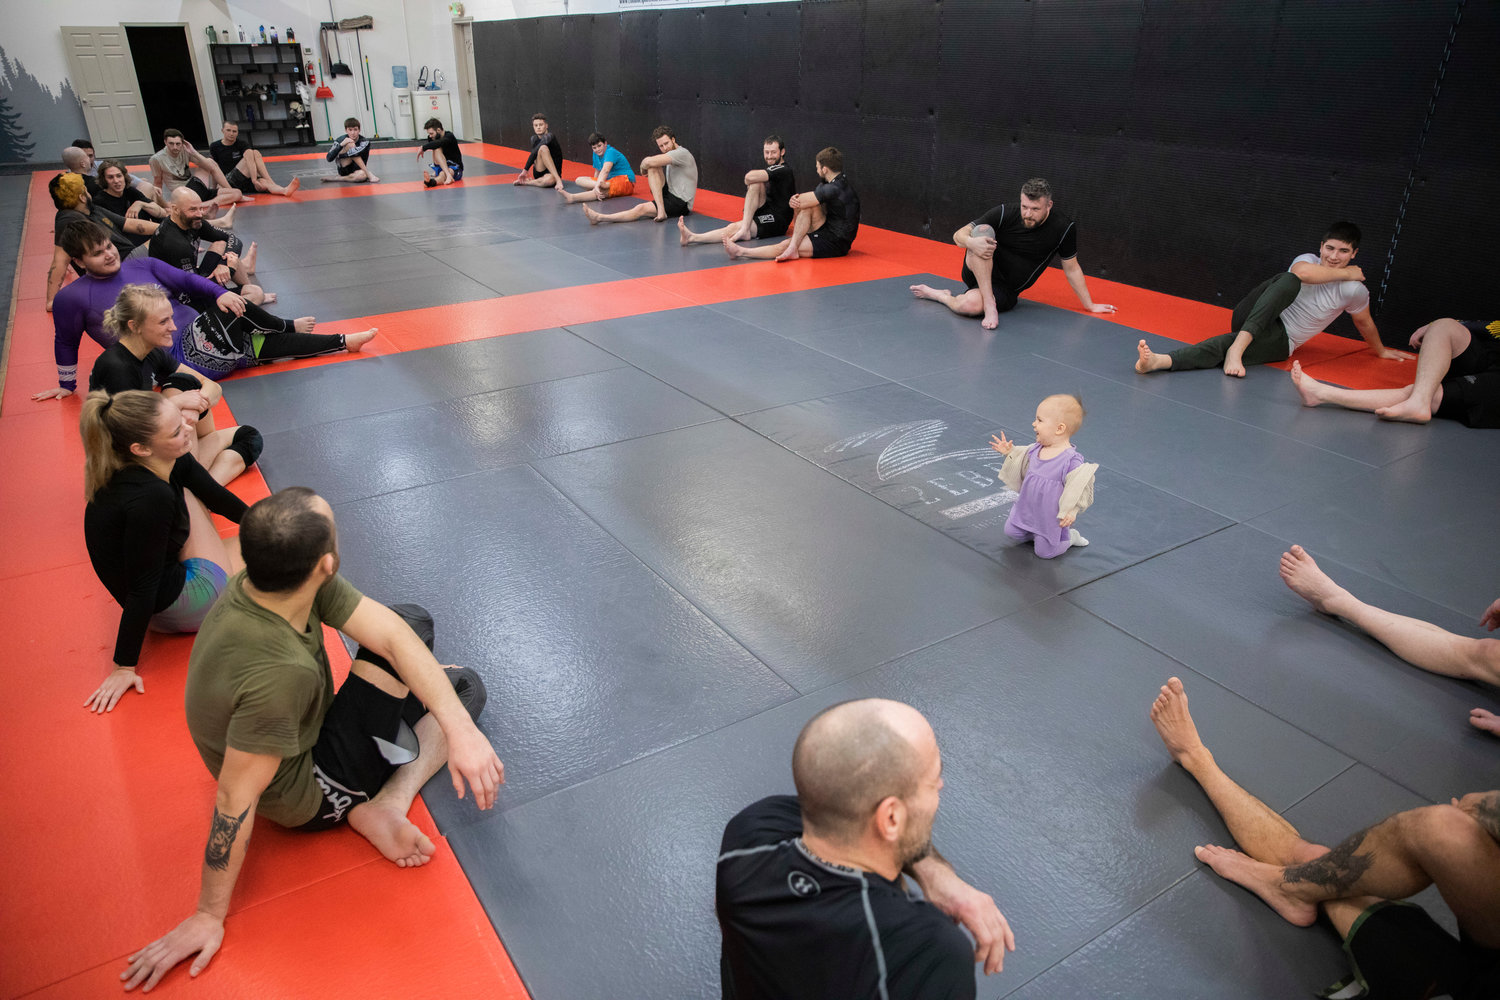 Kayla Weed, a W.F. West graduate, smiles at her 1-year-old daughter Mia inside Combat Sport and Fitness in Enumclaw on Thursday as she stretches.